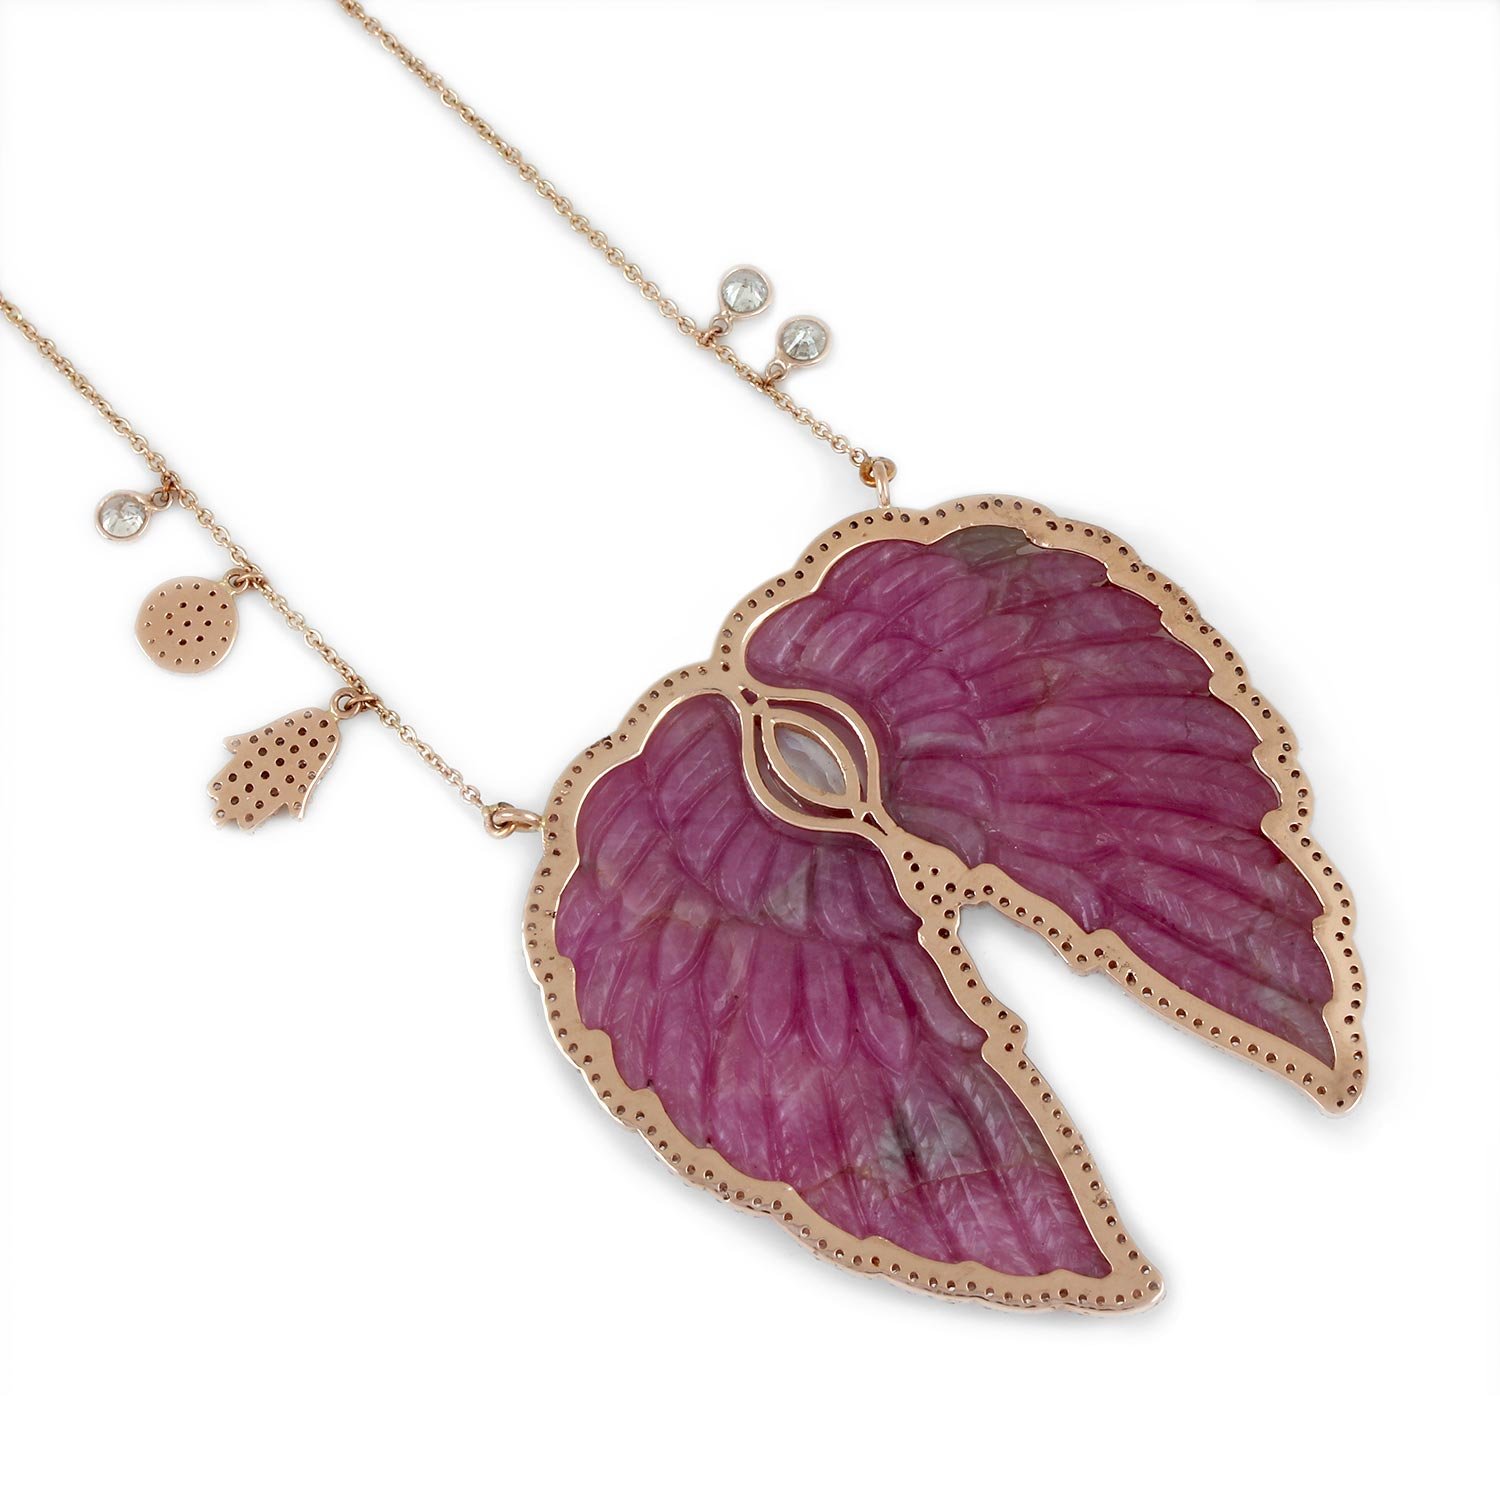 Carved Sapphire Natural Pave Diamond Angel Wings Pendant Necklace Moonstone 14K Solid Gold Jewelry